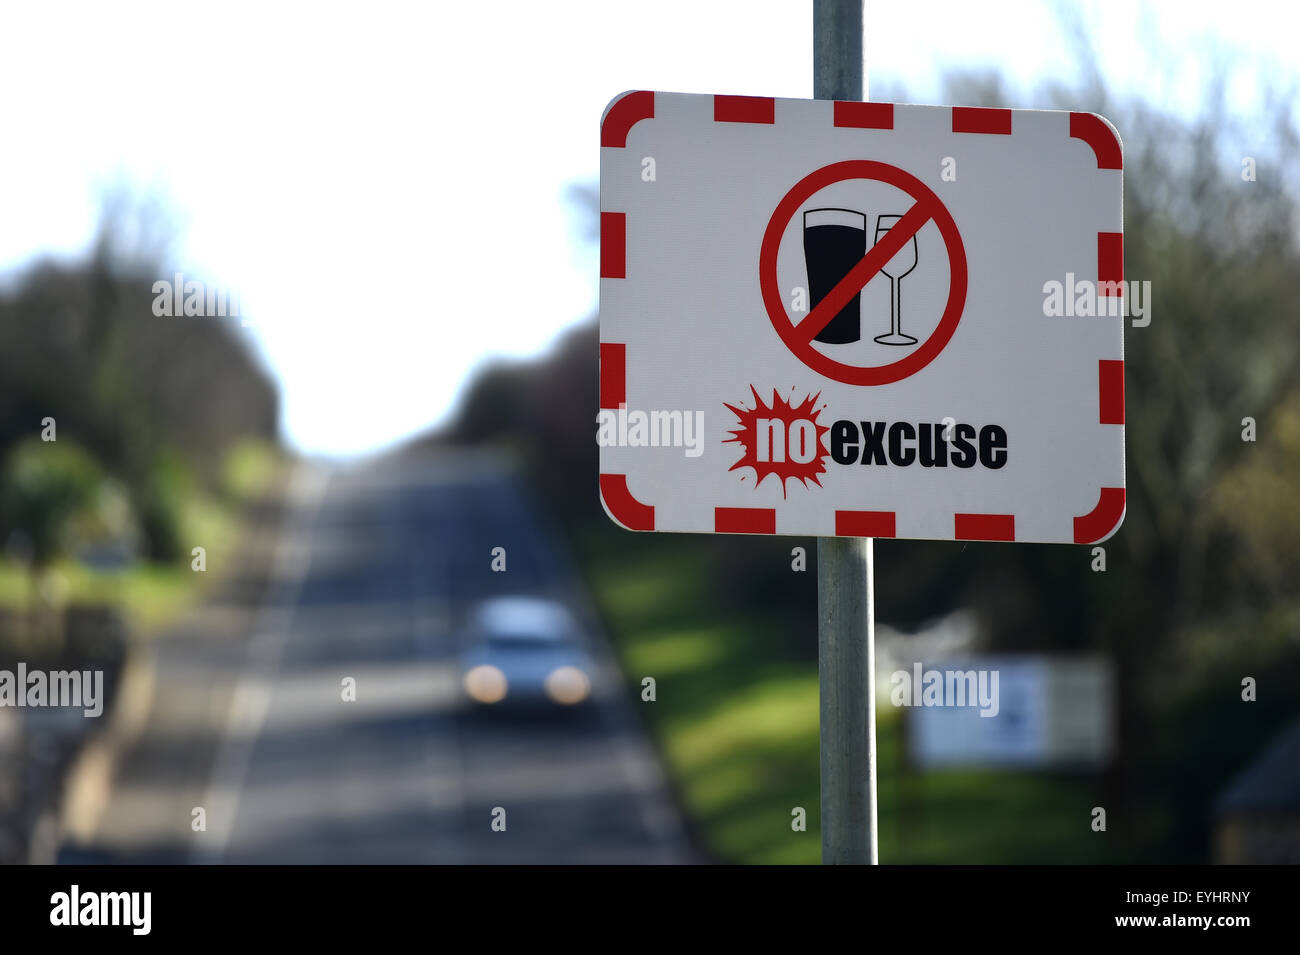 Drink driving sign, No Excuse campaign sign against drink driving in UK Stock Photo